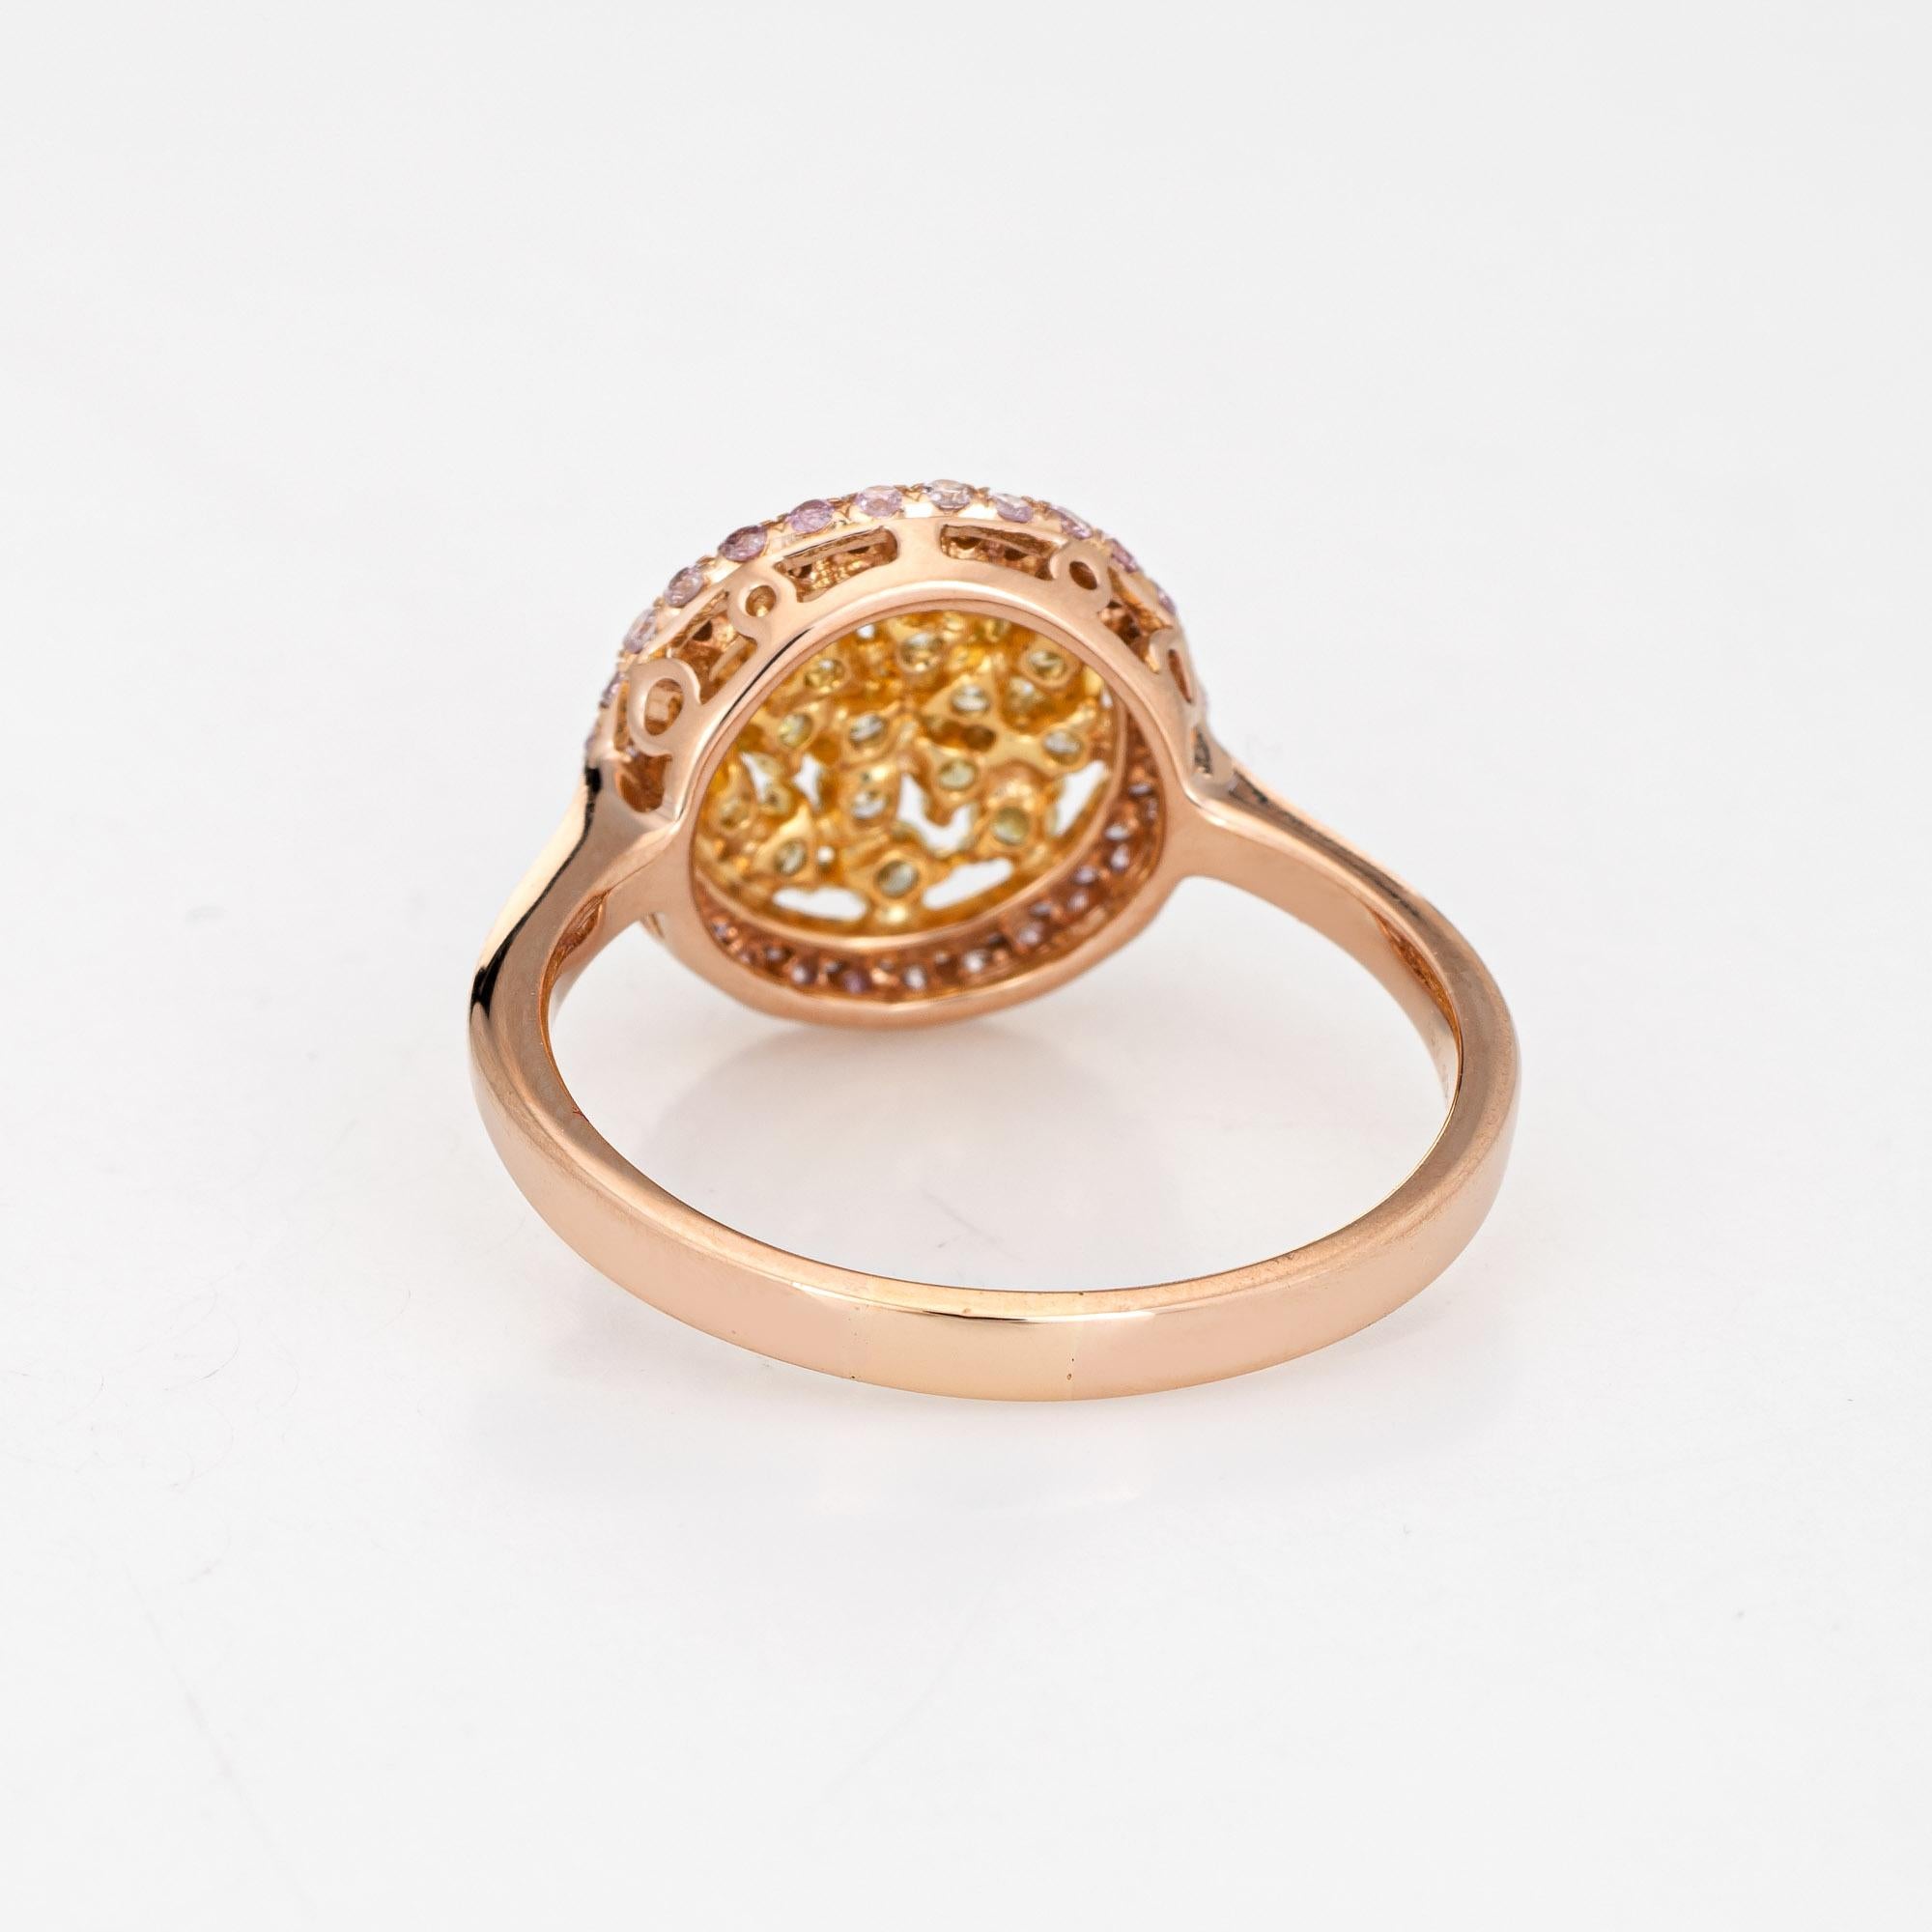 Pink Yellow Diamond Halo Ring Estate 18 Karat Rose Gold Fine Colored Gemstones In Good Condition For Sale In Torrance, CA